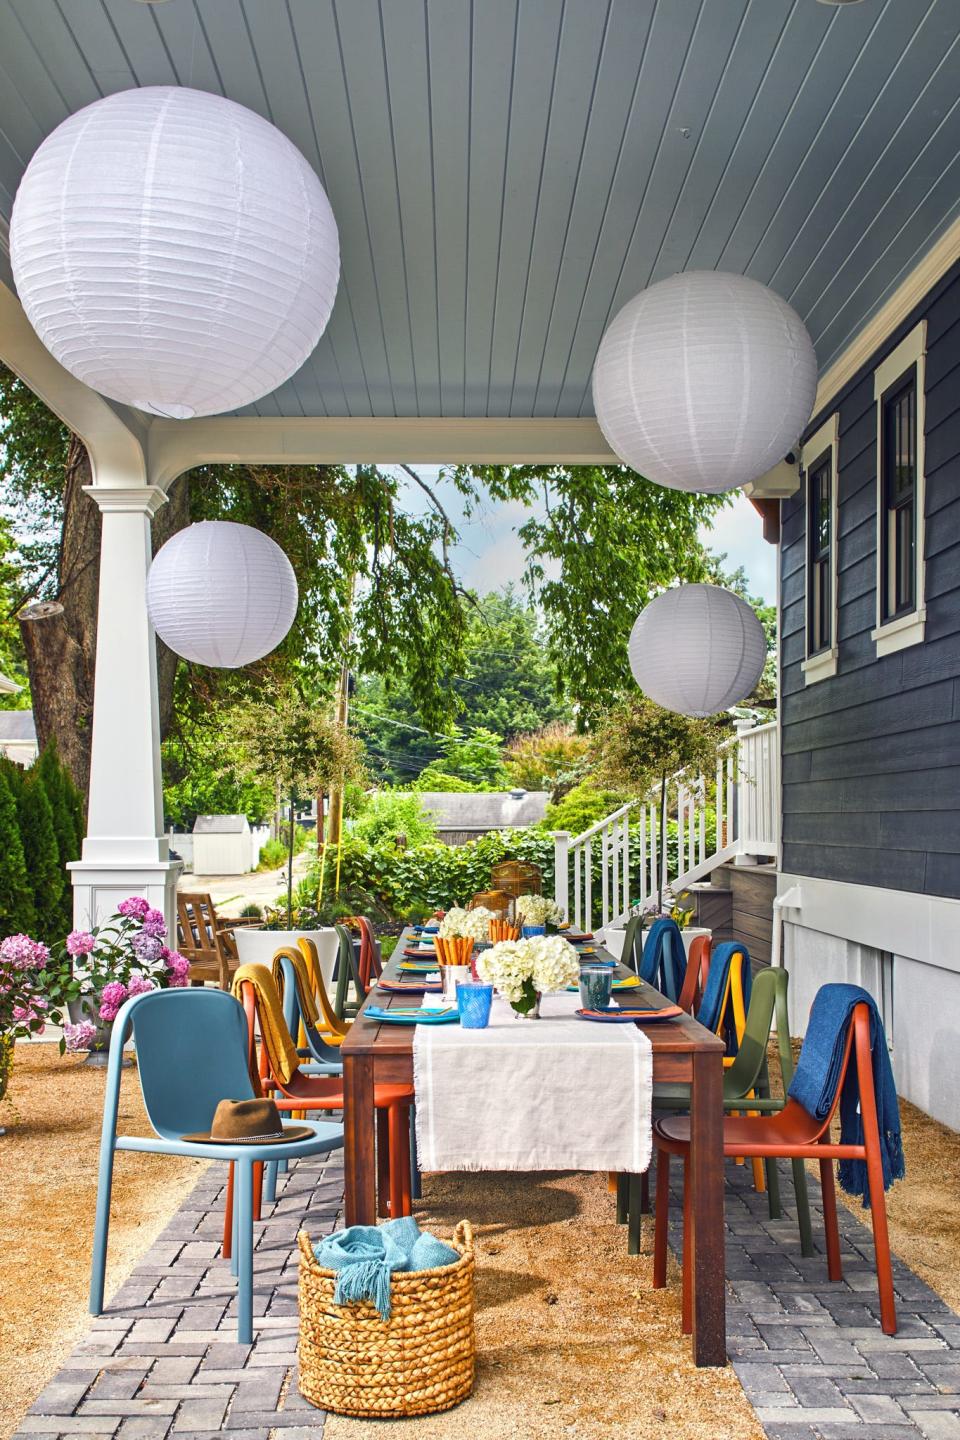 Built by Louisville’s Twin Spires Remodeling and decked out by HGTV interior designer Brian Patrick Flynn, the house is part of the HGTV Urban Oasis 2023 sweepstakes. Pictured here is the carport, with a party table set up.